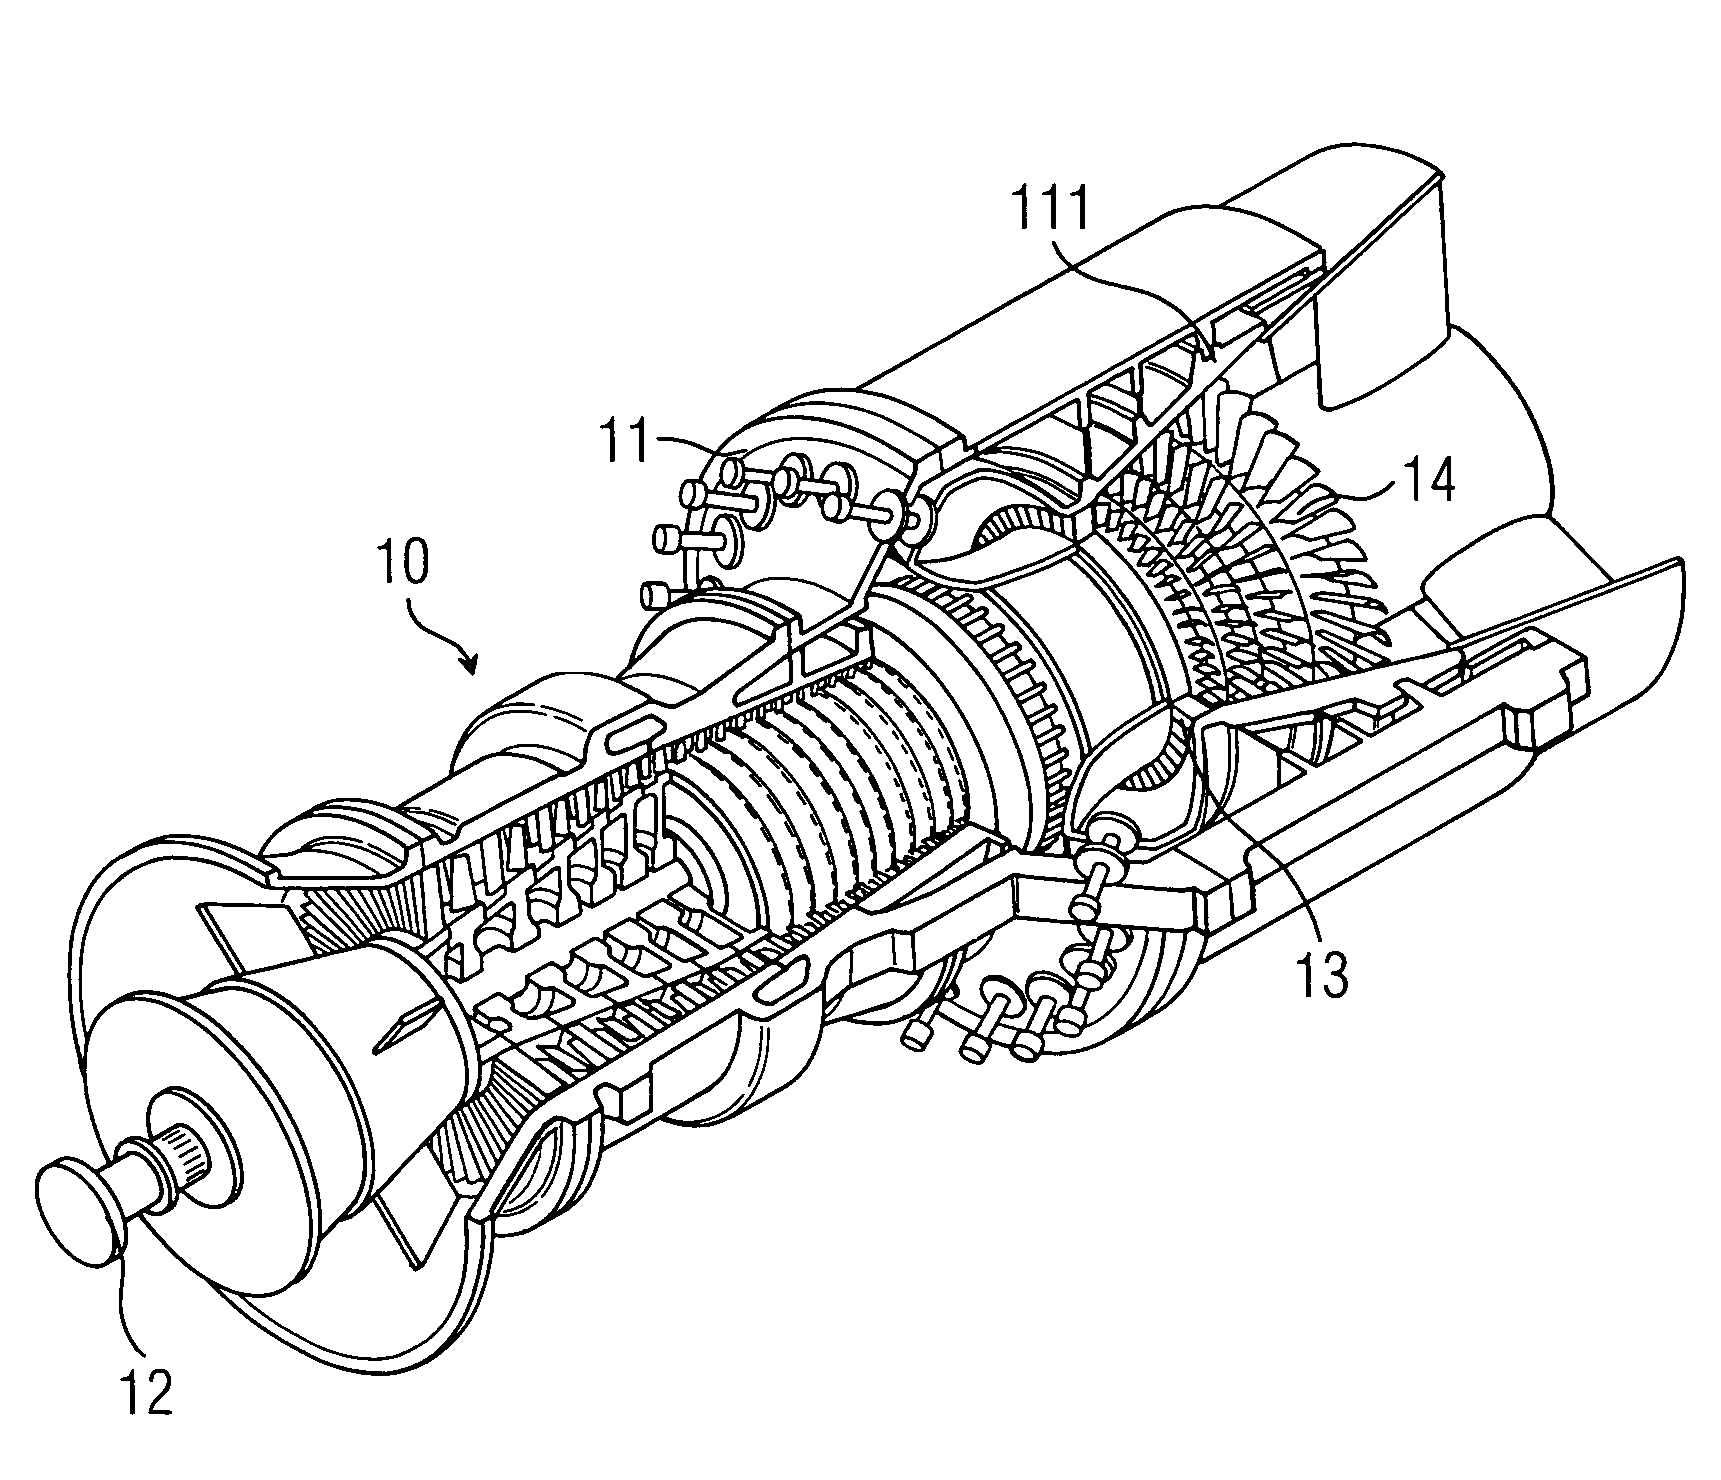 Device for determining the distance between a rotor blade and a wall of a turbine engine surrounding the rotor blade